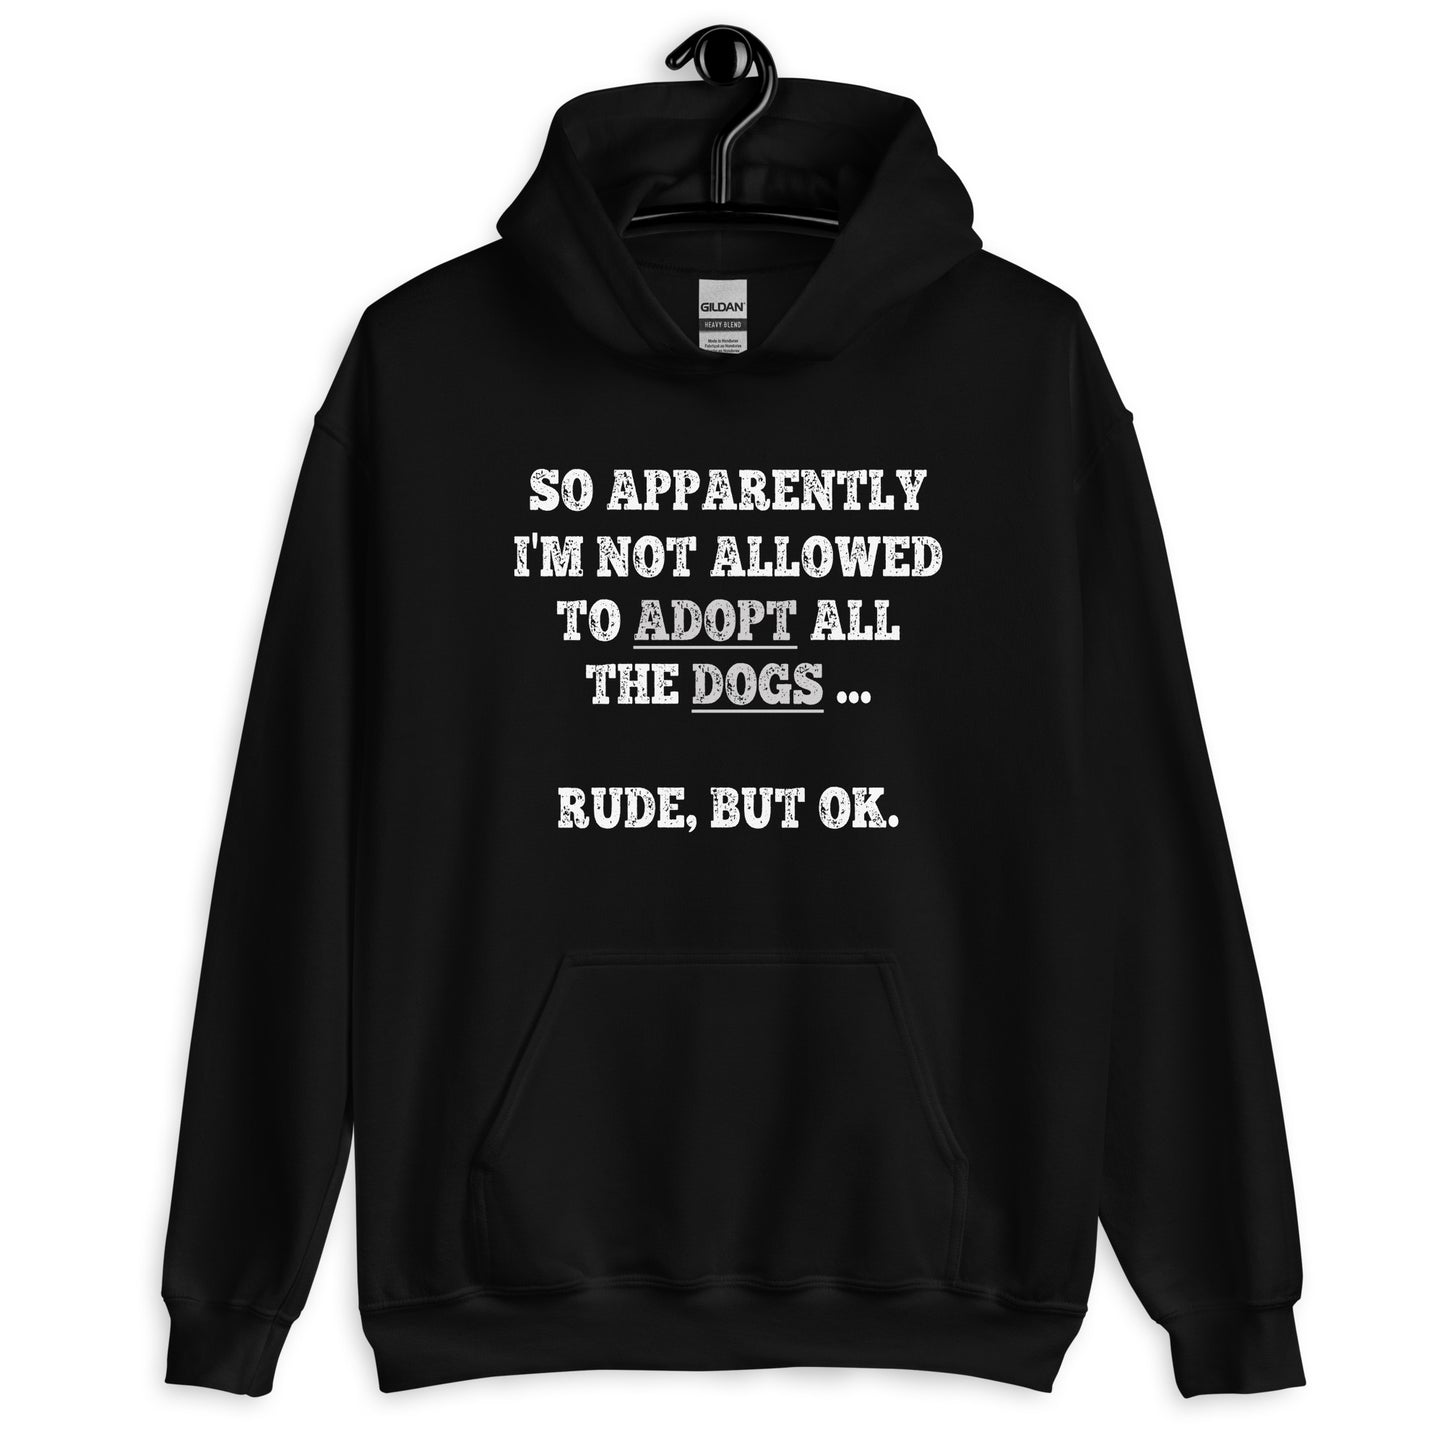 So Apparently I'm Not Allowed To Adopt All The Dogs ... Rude, But OK. Hoodie